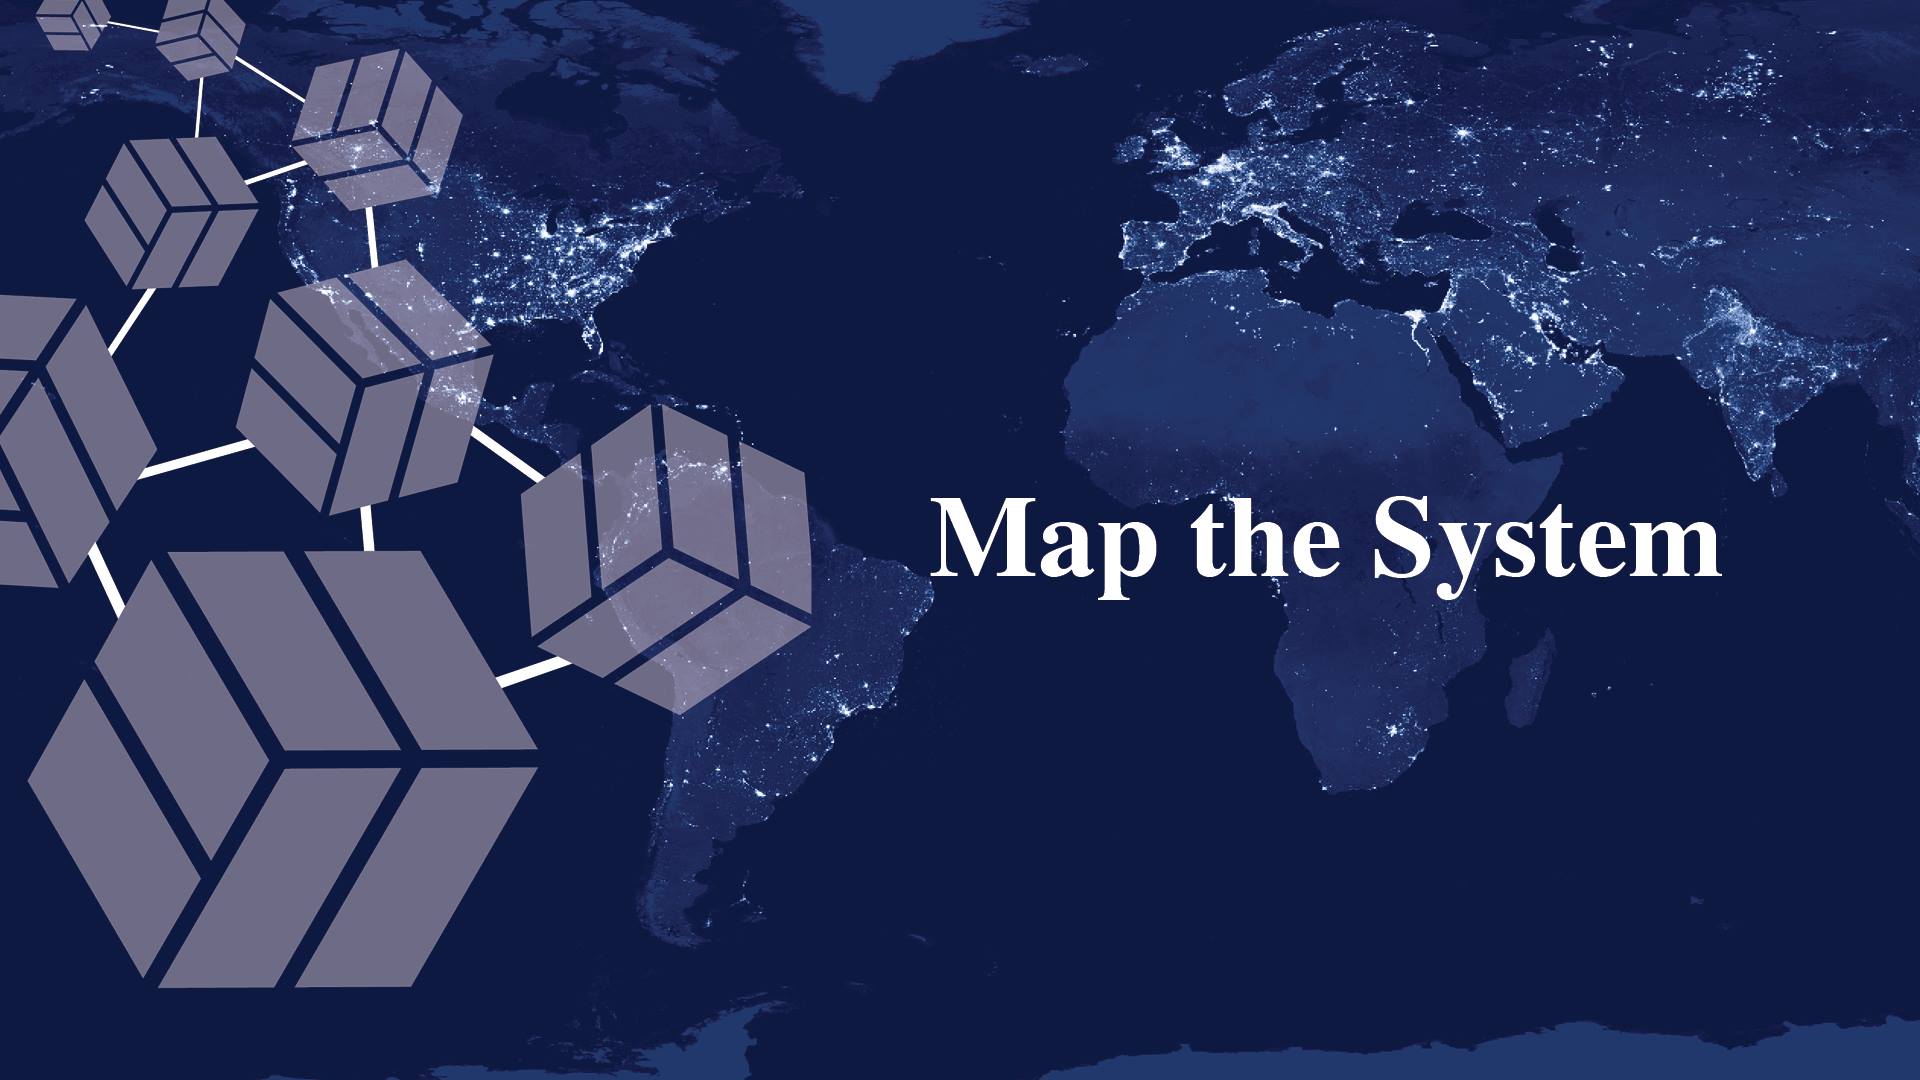 a poster set in dark blue with the words "Map The System"